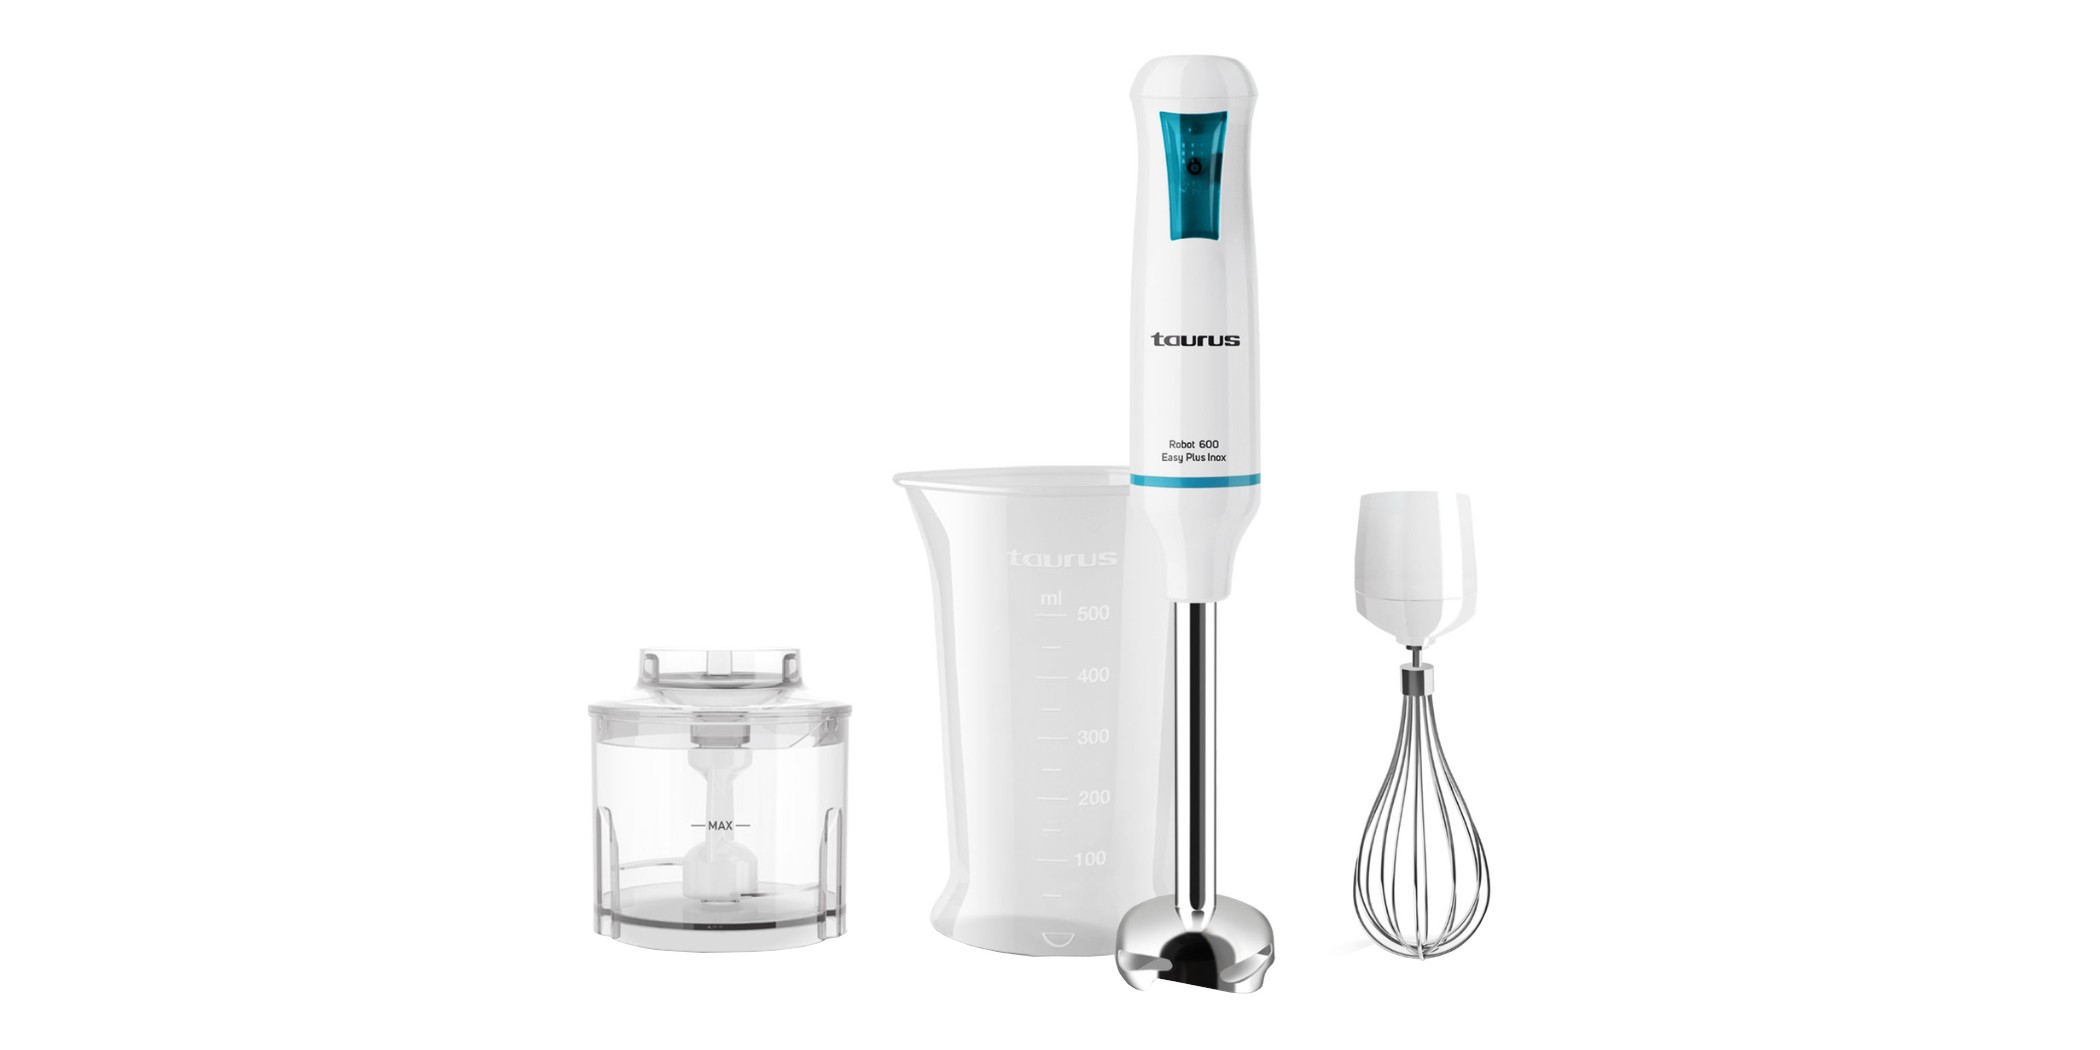 Taurus Robot 600 Easy Plus Inox 600W Hand Blender With Chopper jar, Whisk & Measuring Cup- 916998000